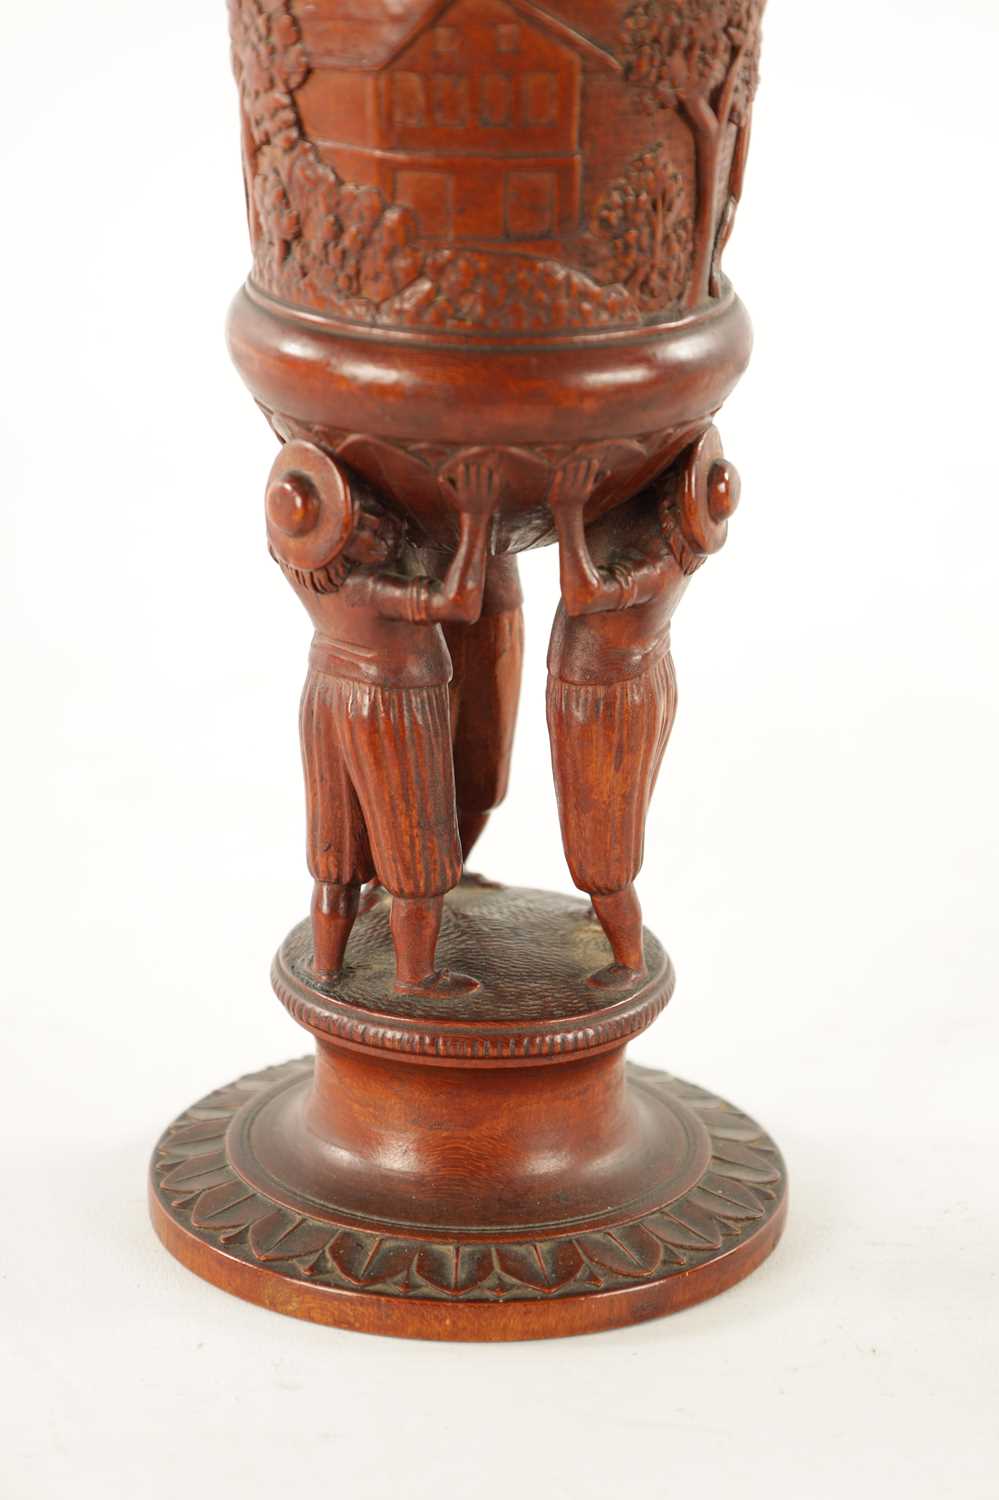 A FINE 19TH CENTURY BAVARIAN LINDEN-WOOD CARVED TREEN CHALIS AND COVER - Image 5 of 7